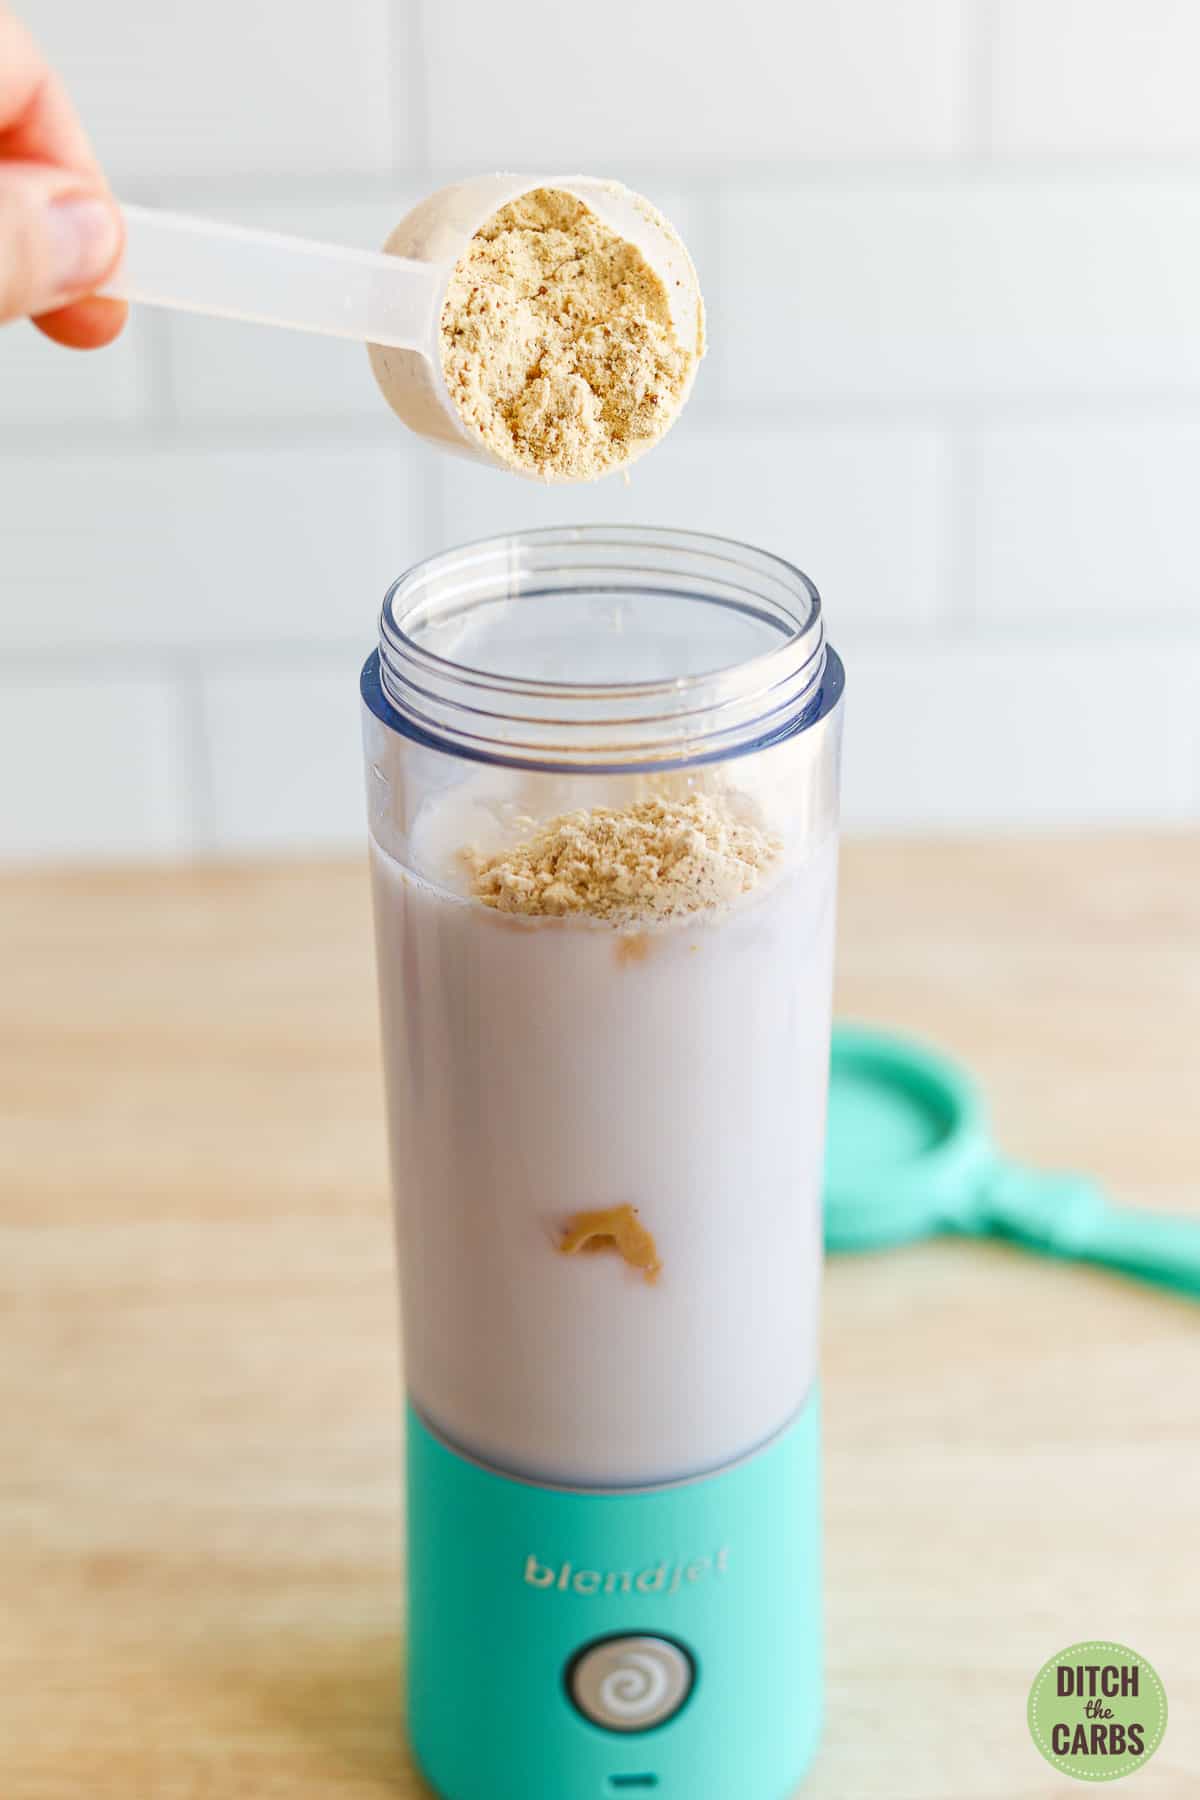 A had is adding a scoop of protein powder to the low-carb protein shake in a personalized blender.